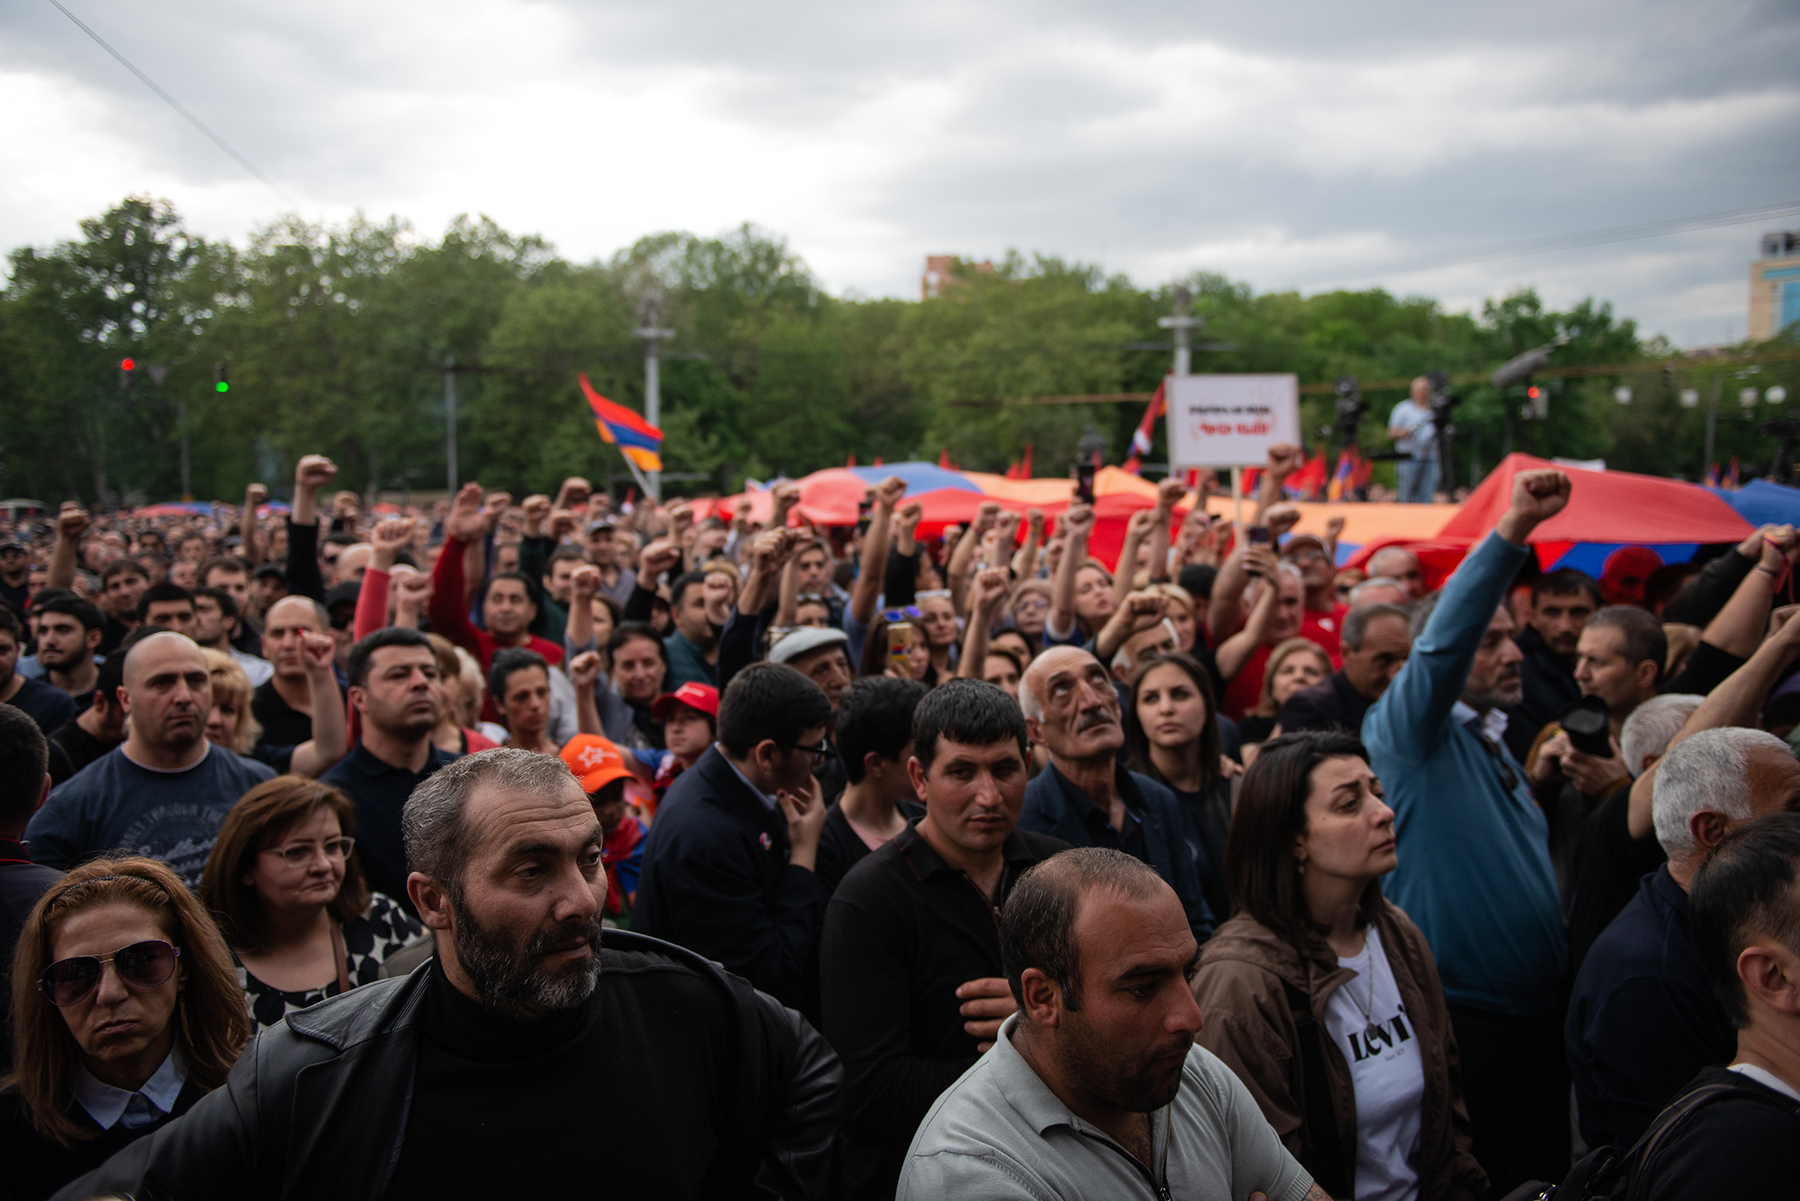 The 1 May rally of the opposition had over 10 thousand in attendance. According to independent estimates, a second mass rally on 8 May had decreased to a little over 8 thousand. Photo: Tamuna Chkareuli.